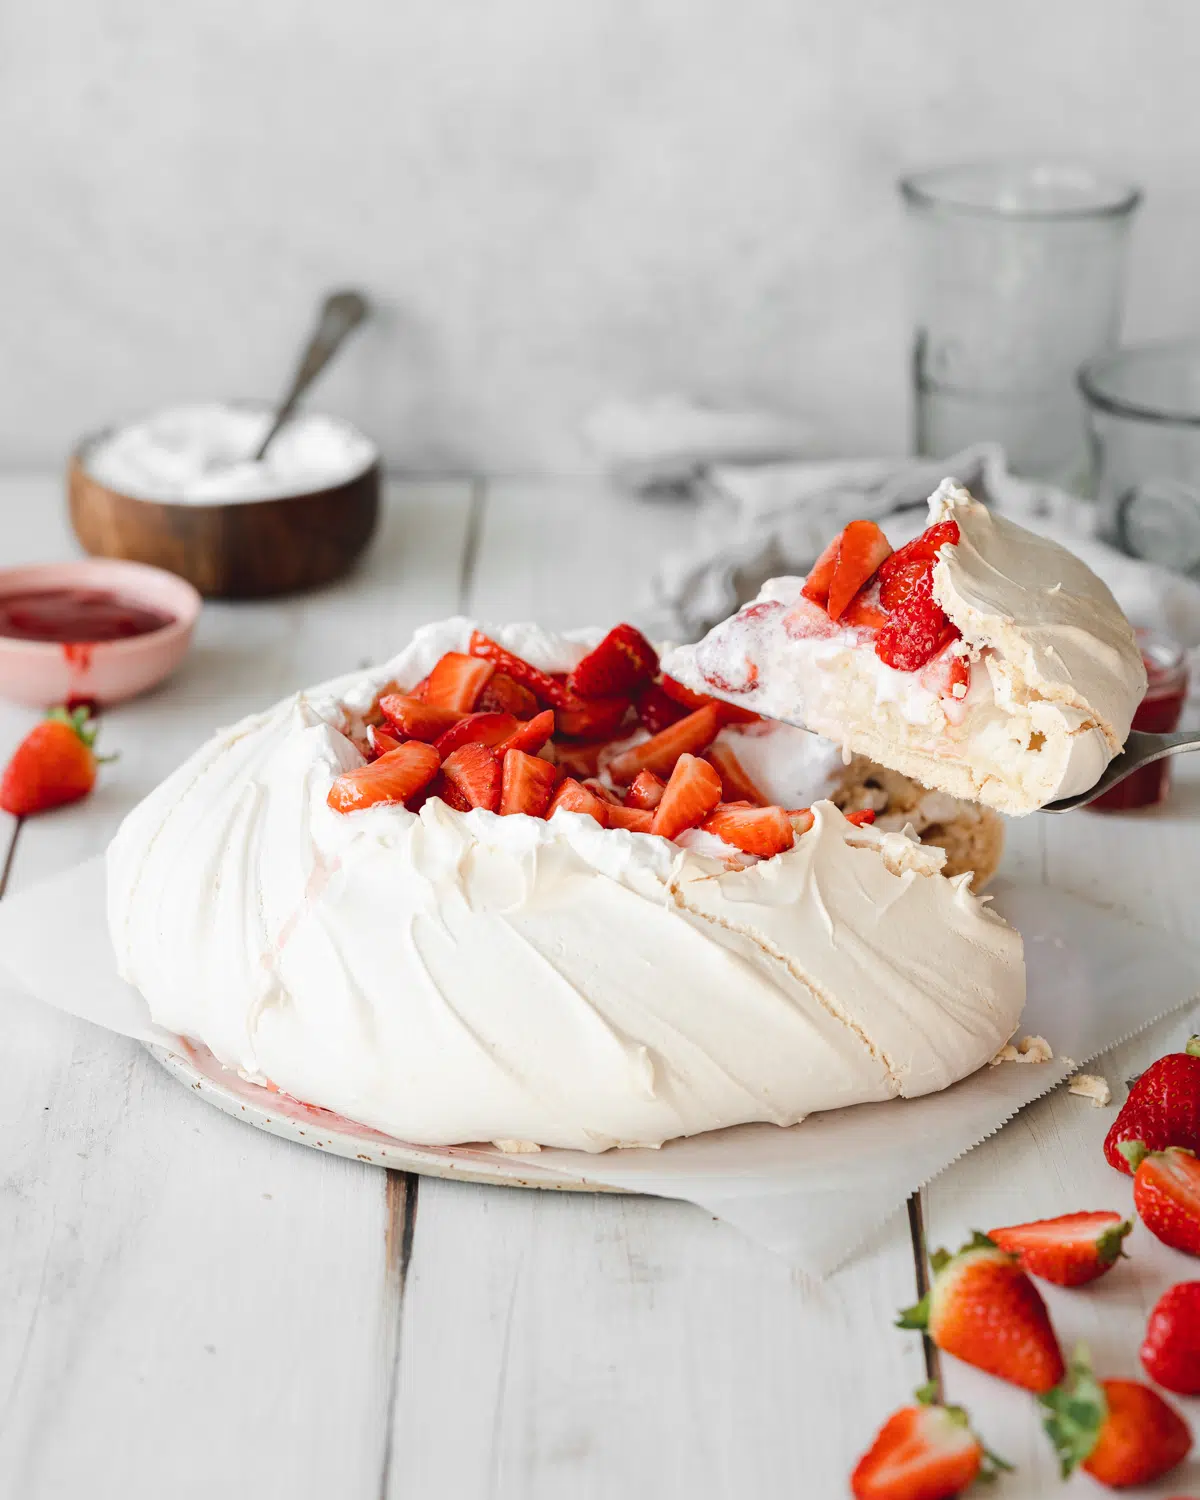 pavlova with strawberries on top and scattered around it.